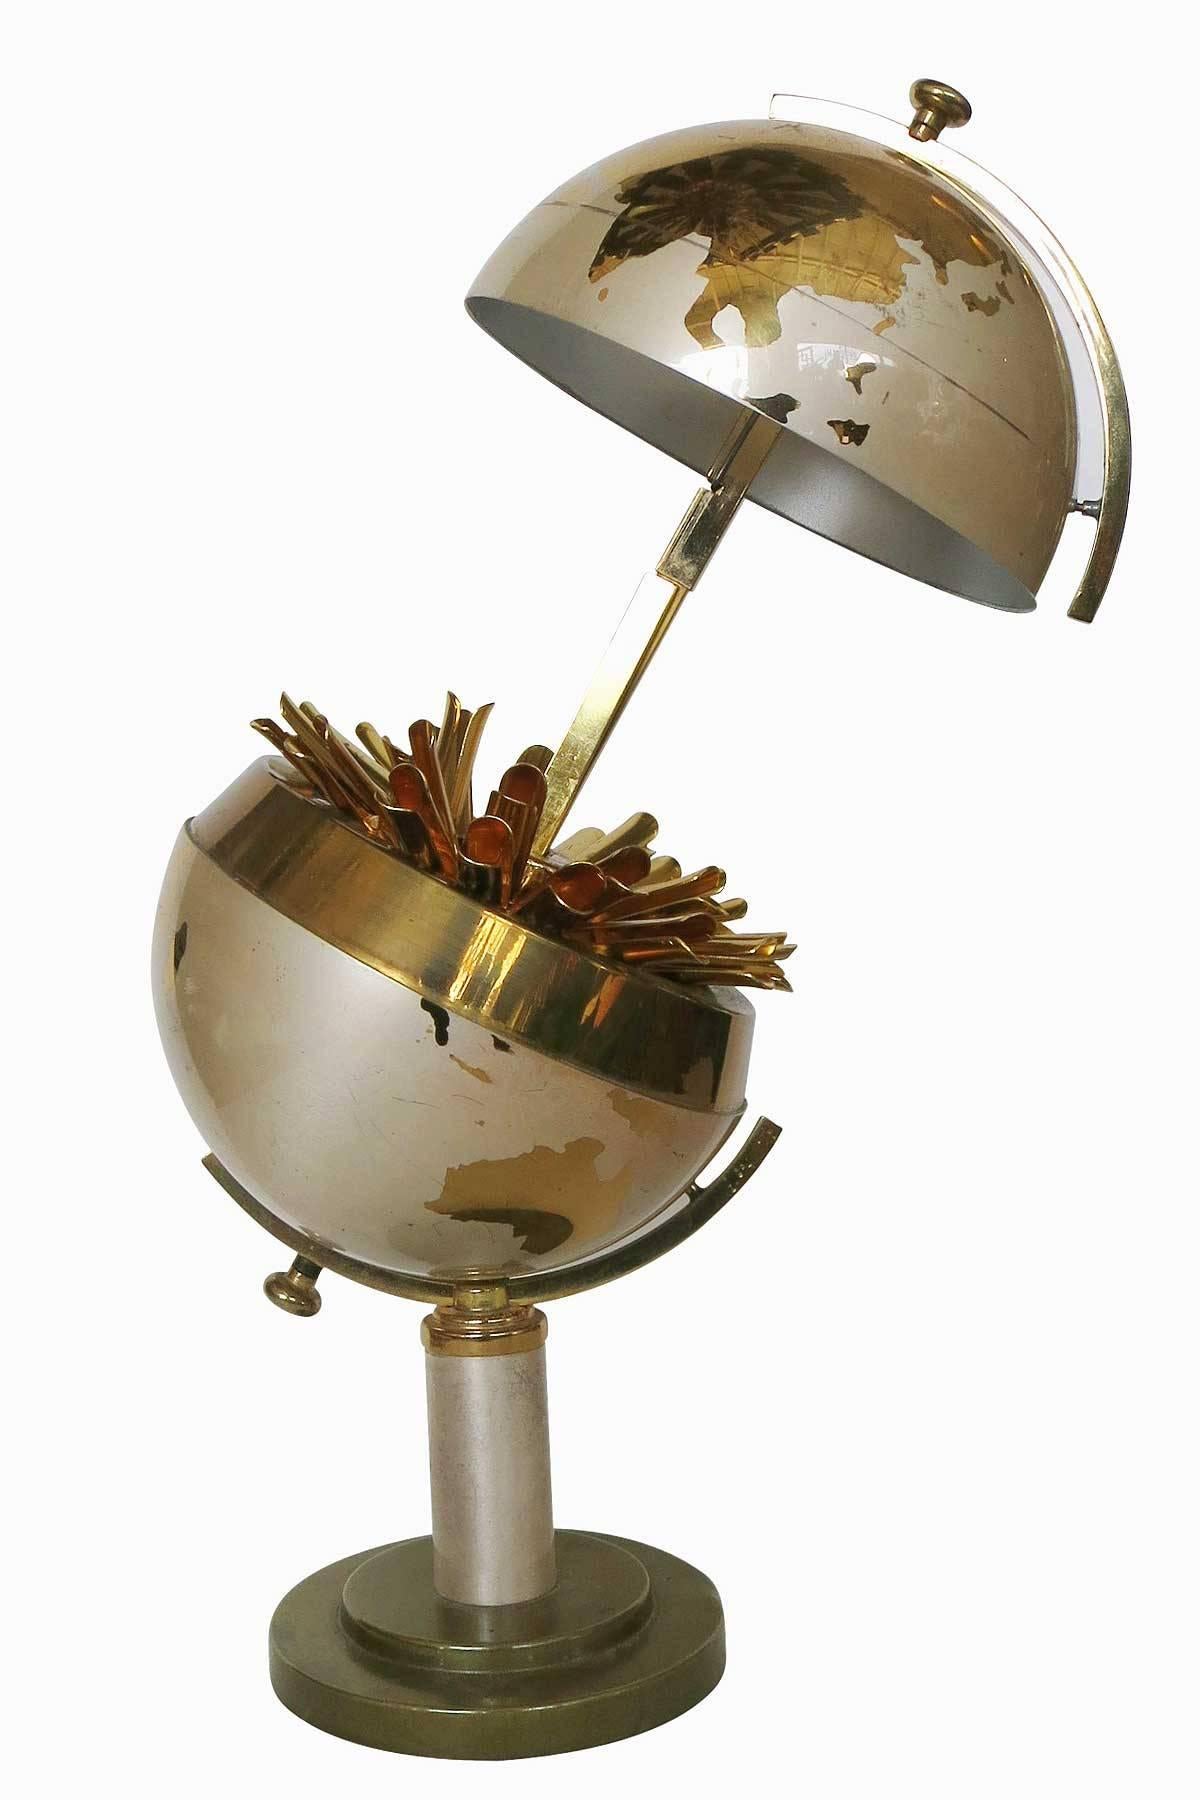 This impressive brushed steel and brass globe cigarette holder by Windmill features a brush steel globe with polished brass continents.

By pulling on the top the globe splits in two opening up to reveal a cigarette holder with 25 small brass arms